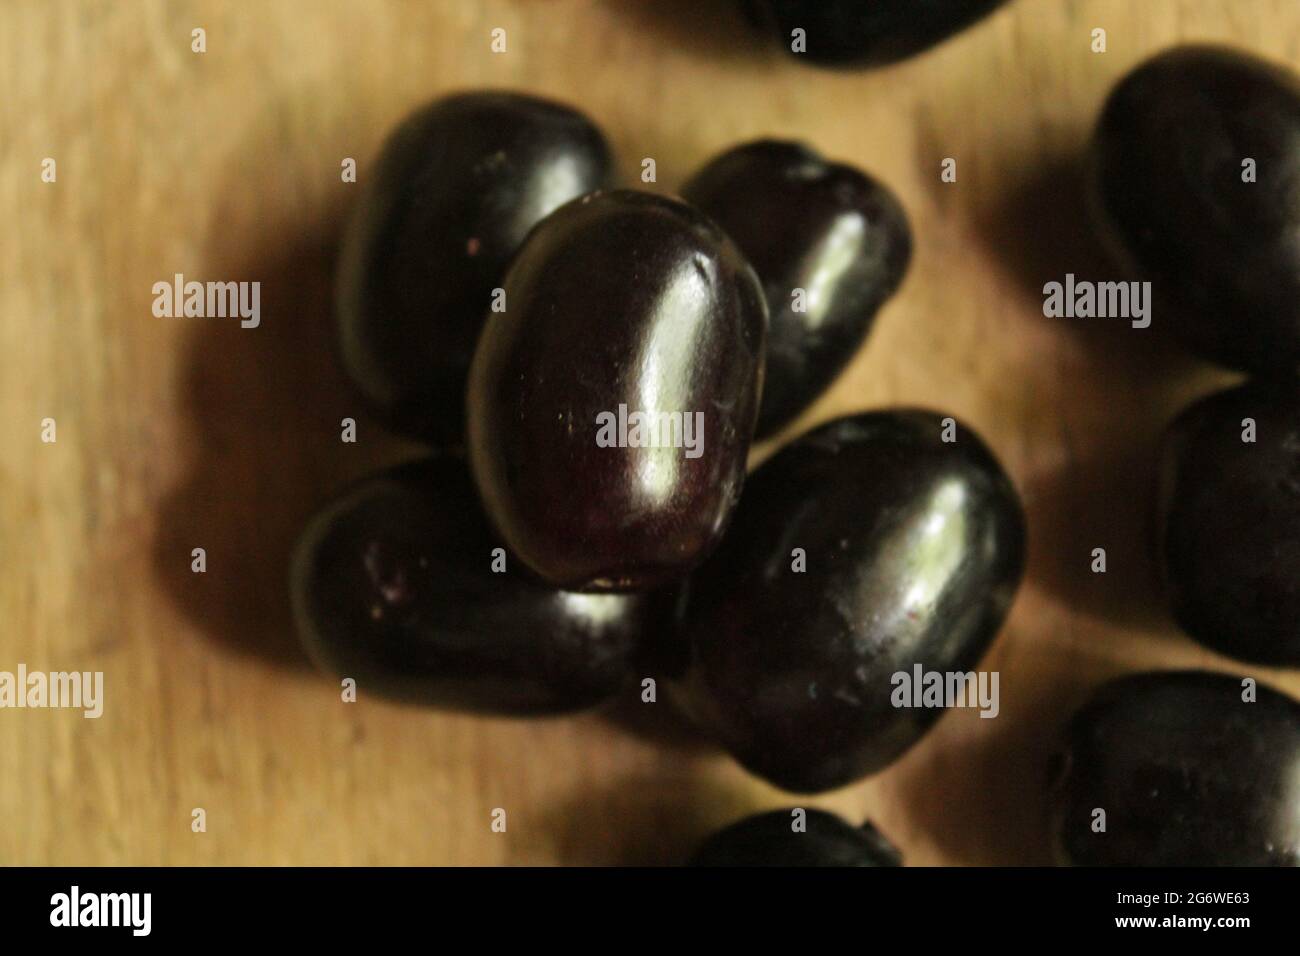 Java plum fruits or syzygium fruit on isolated wooden surface, top view, blue berry fruit, new image Stock Photo